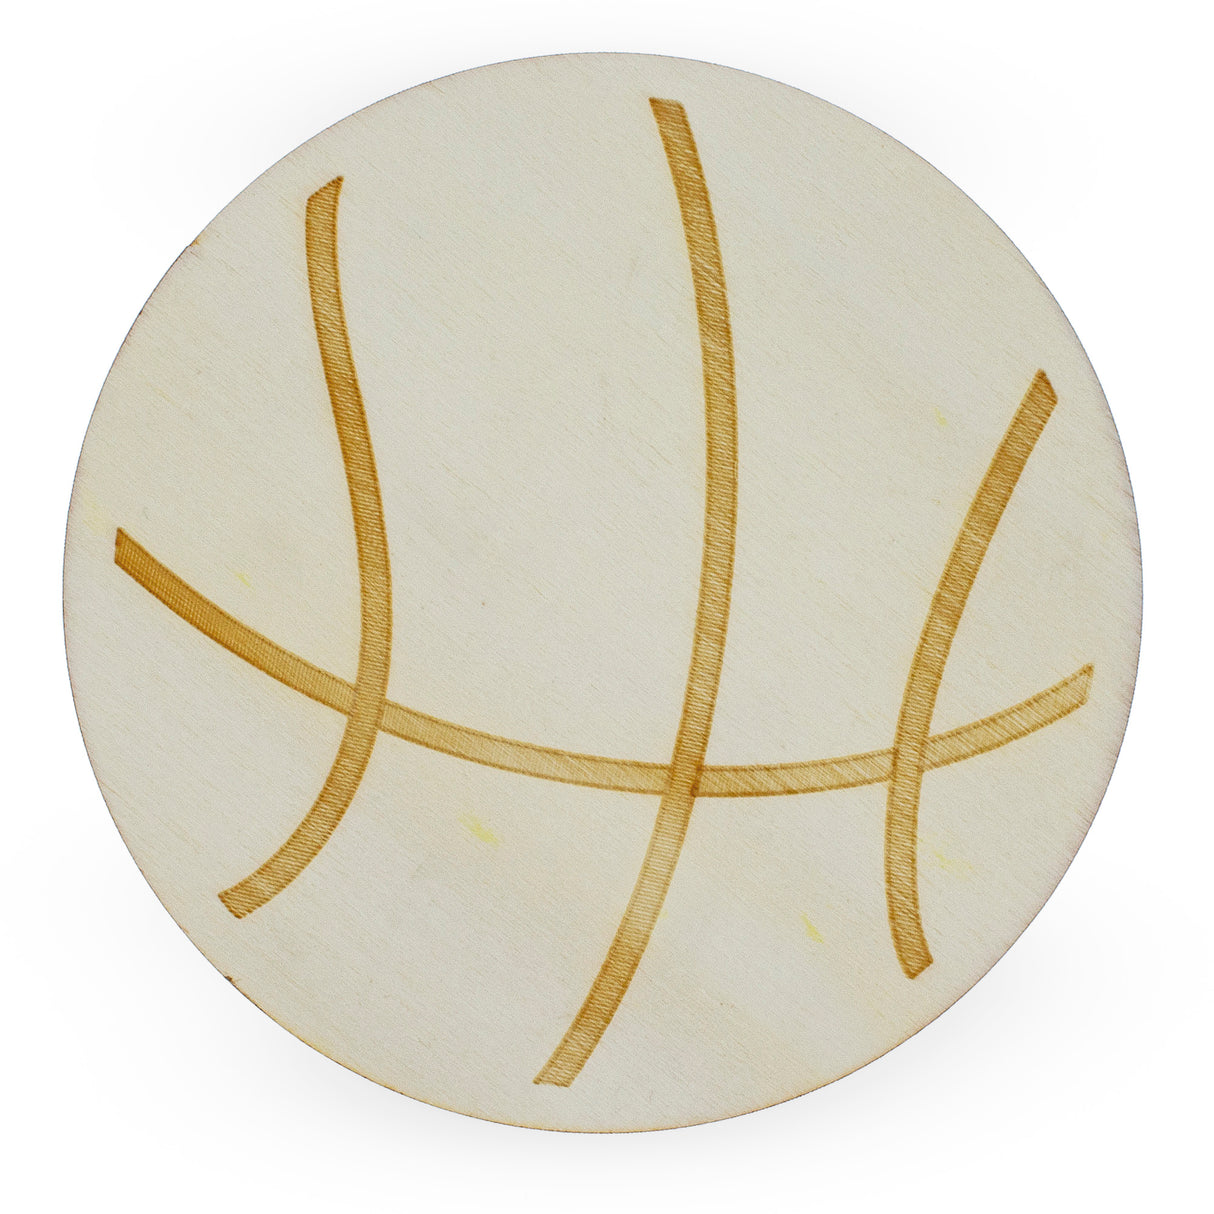 Unfinished Unpainted Wooden Basketball Shape Cutout DIY Craft 4.2 Inches in Beige color, Round shape